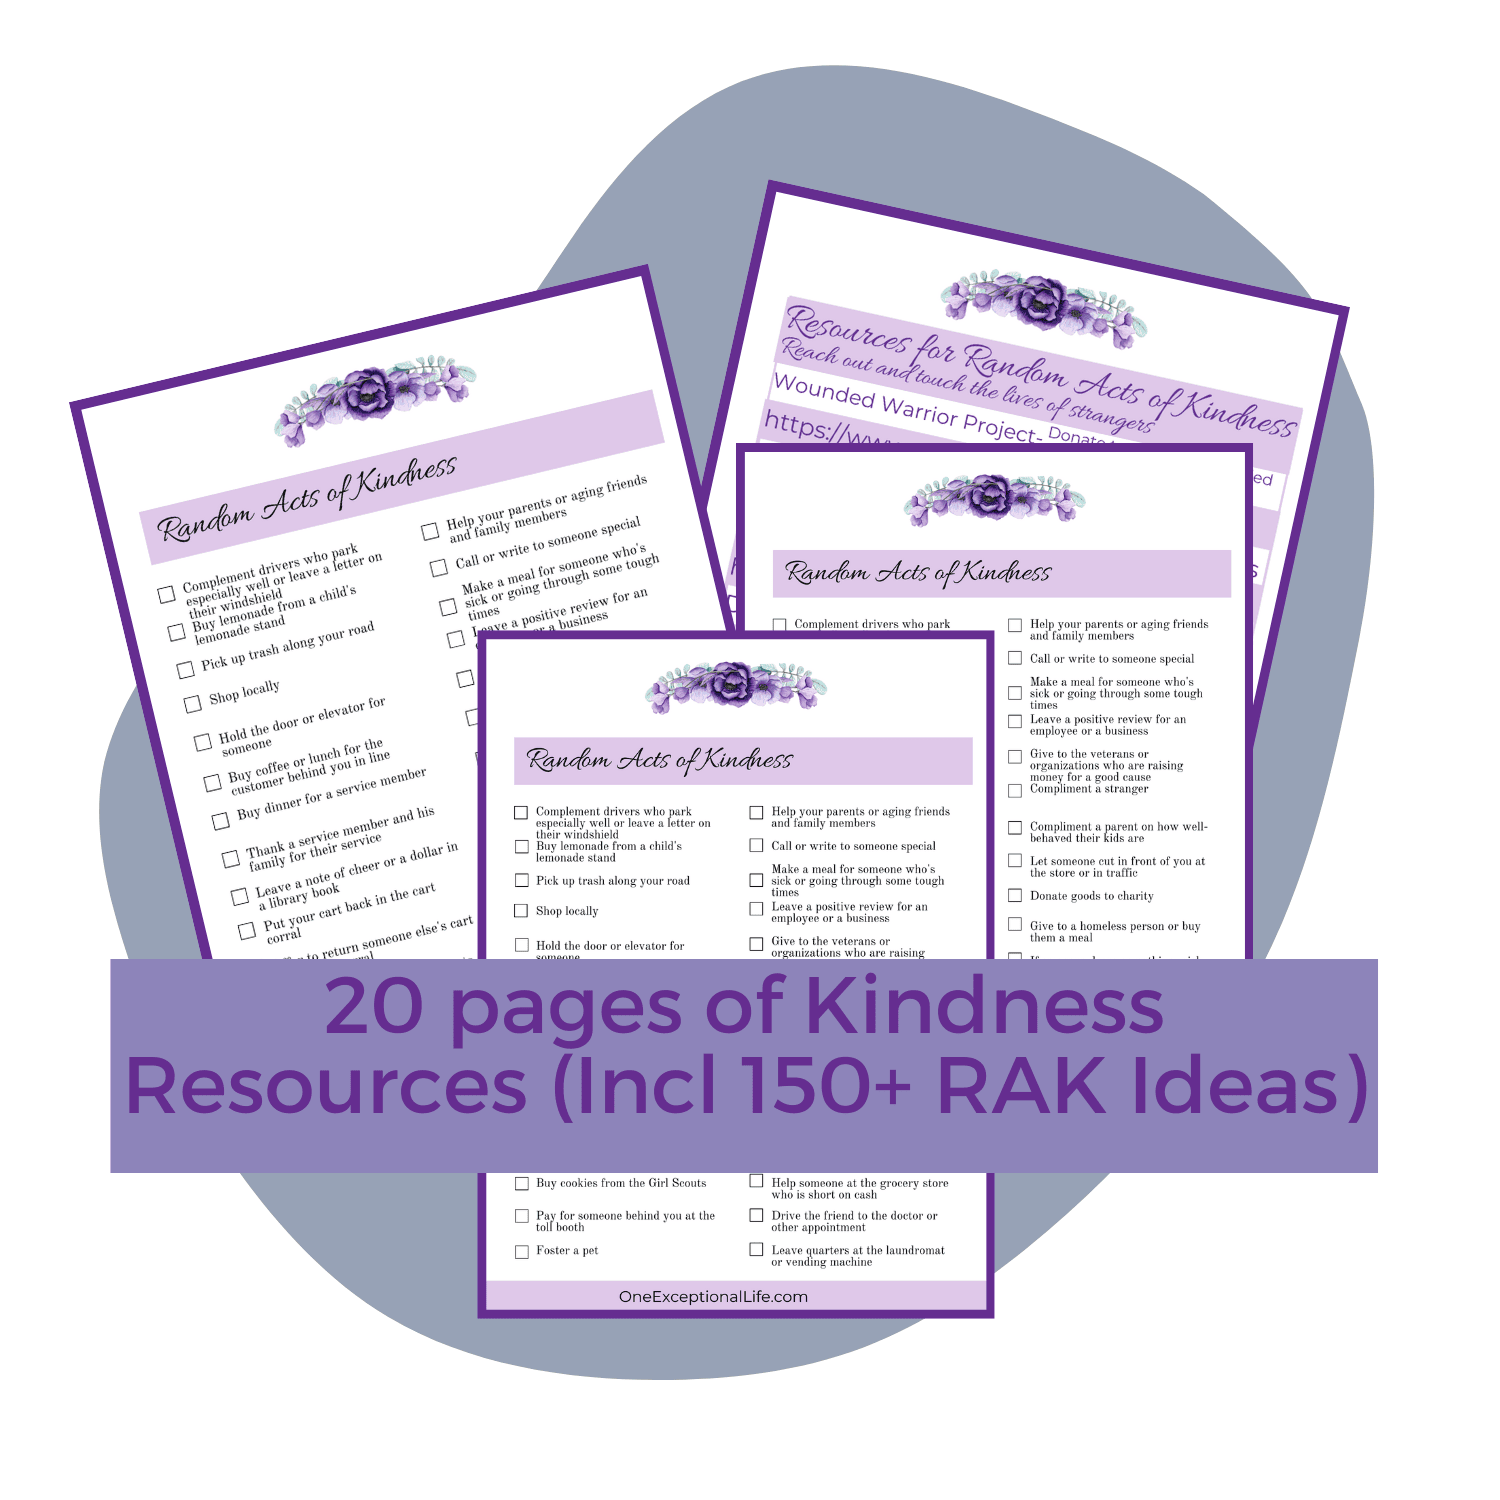 faith over fear toolbox mockup with kindness resources